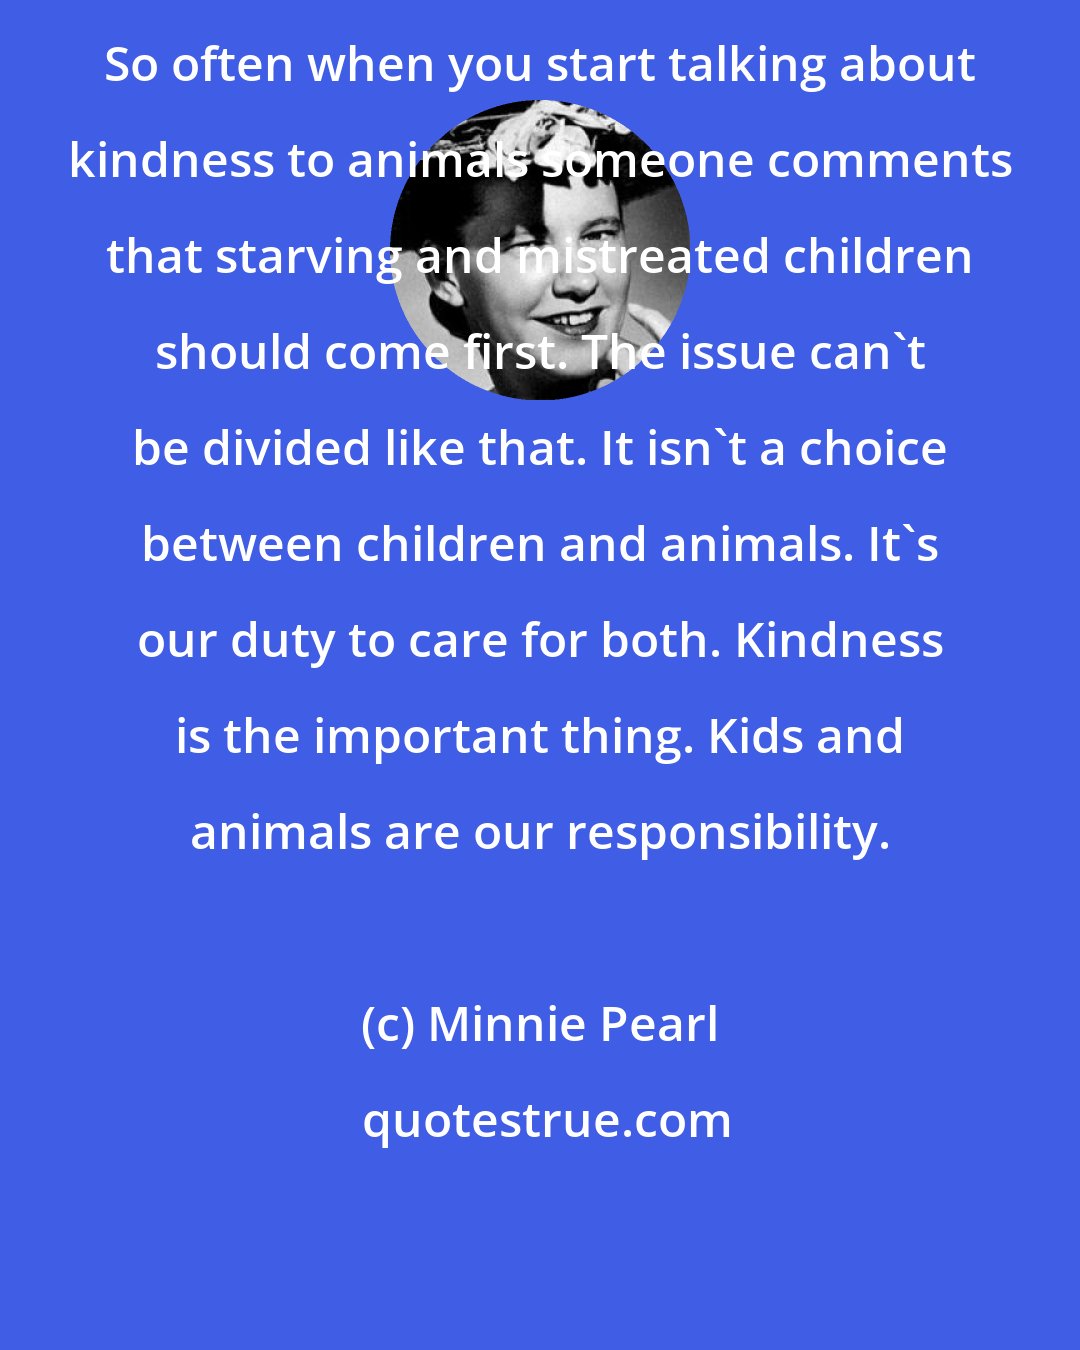 Minnie Pearl: So often when you start talking about kindness to animals someone comments that starving and mistreated children should come first. The issue can't be divided like that. It isn't a choice between children and animals. It's our duty to care for both. Kindness is the important thing. Kids and animals are our responsibility.